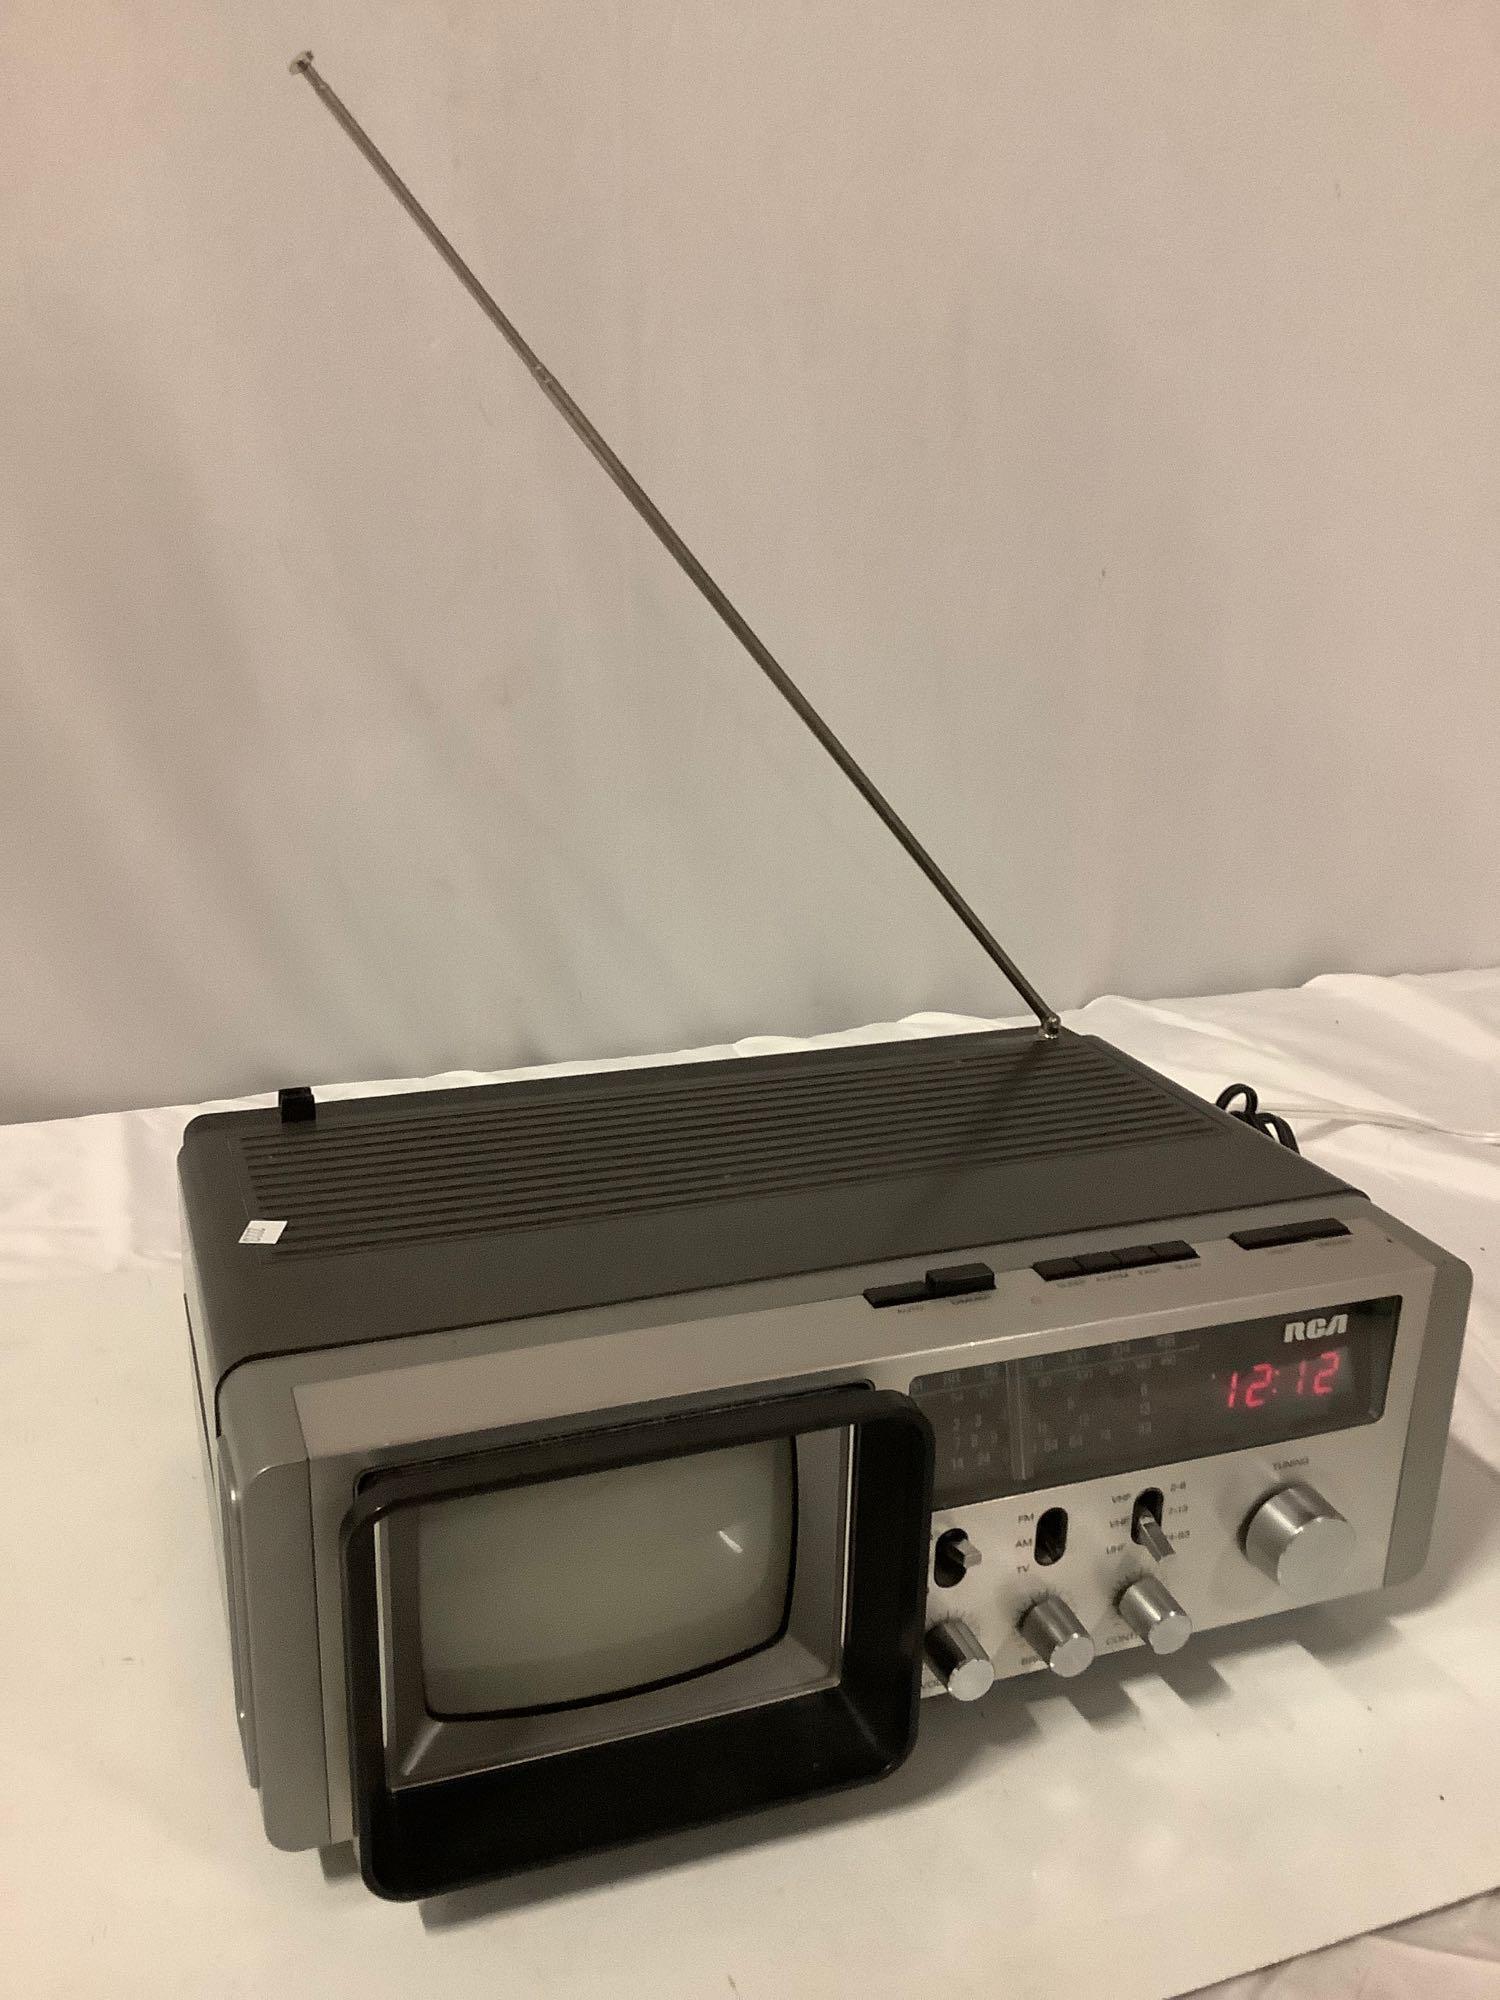 Vintage RCA am/fm / TV Weather band radio, tested / powers on, sold as is.